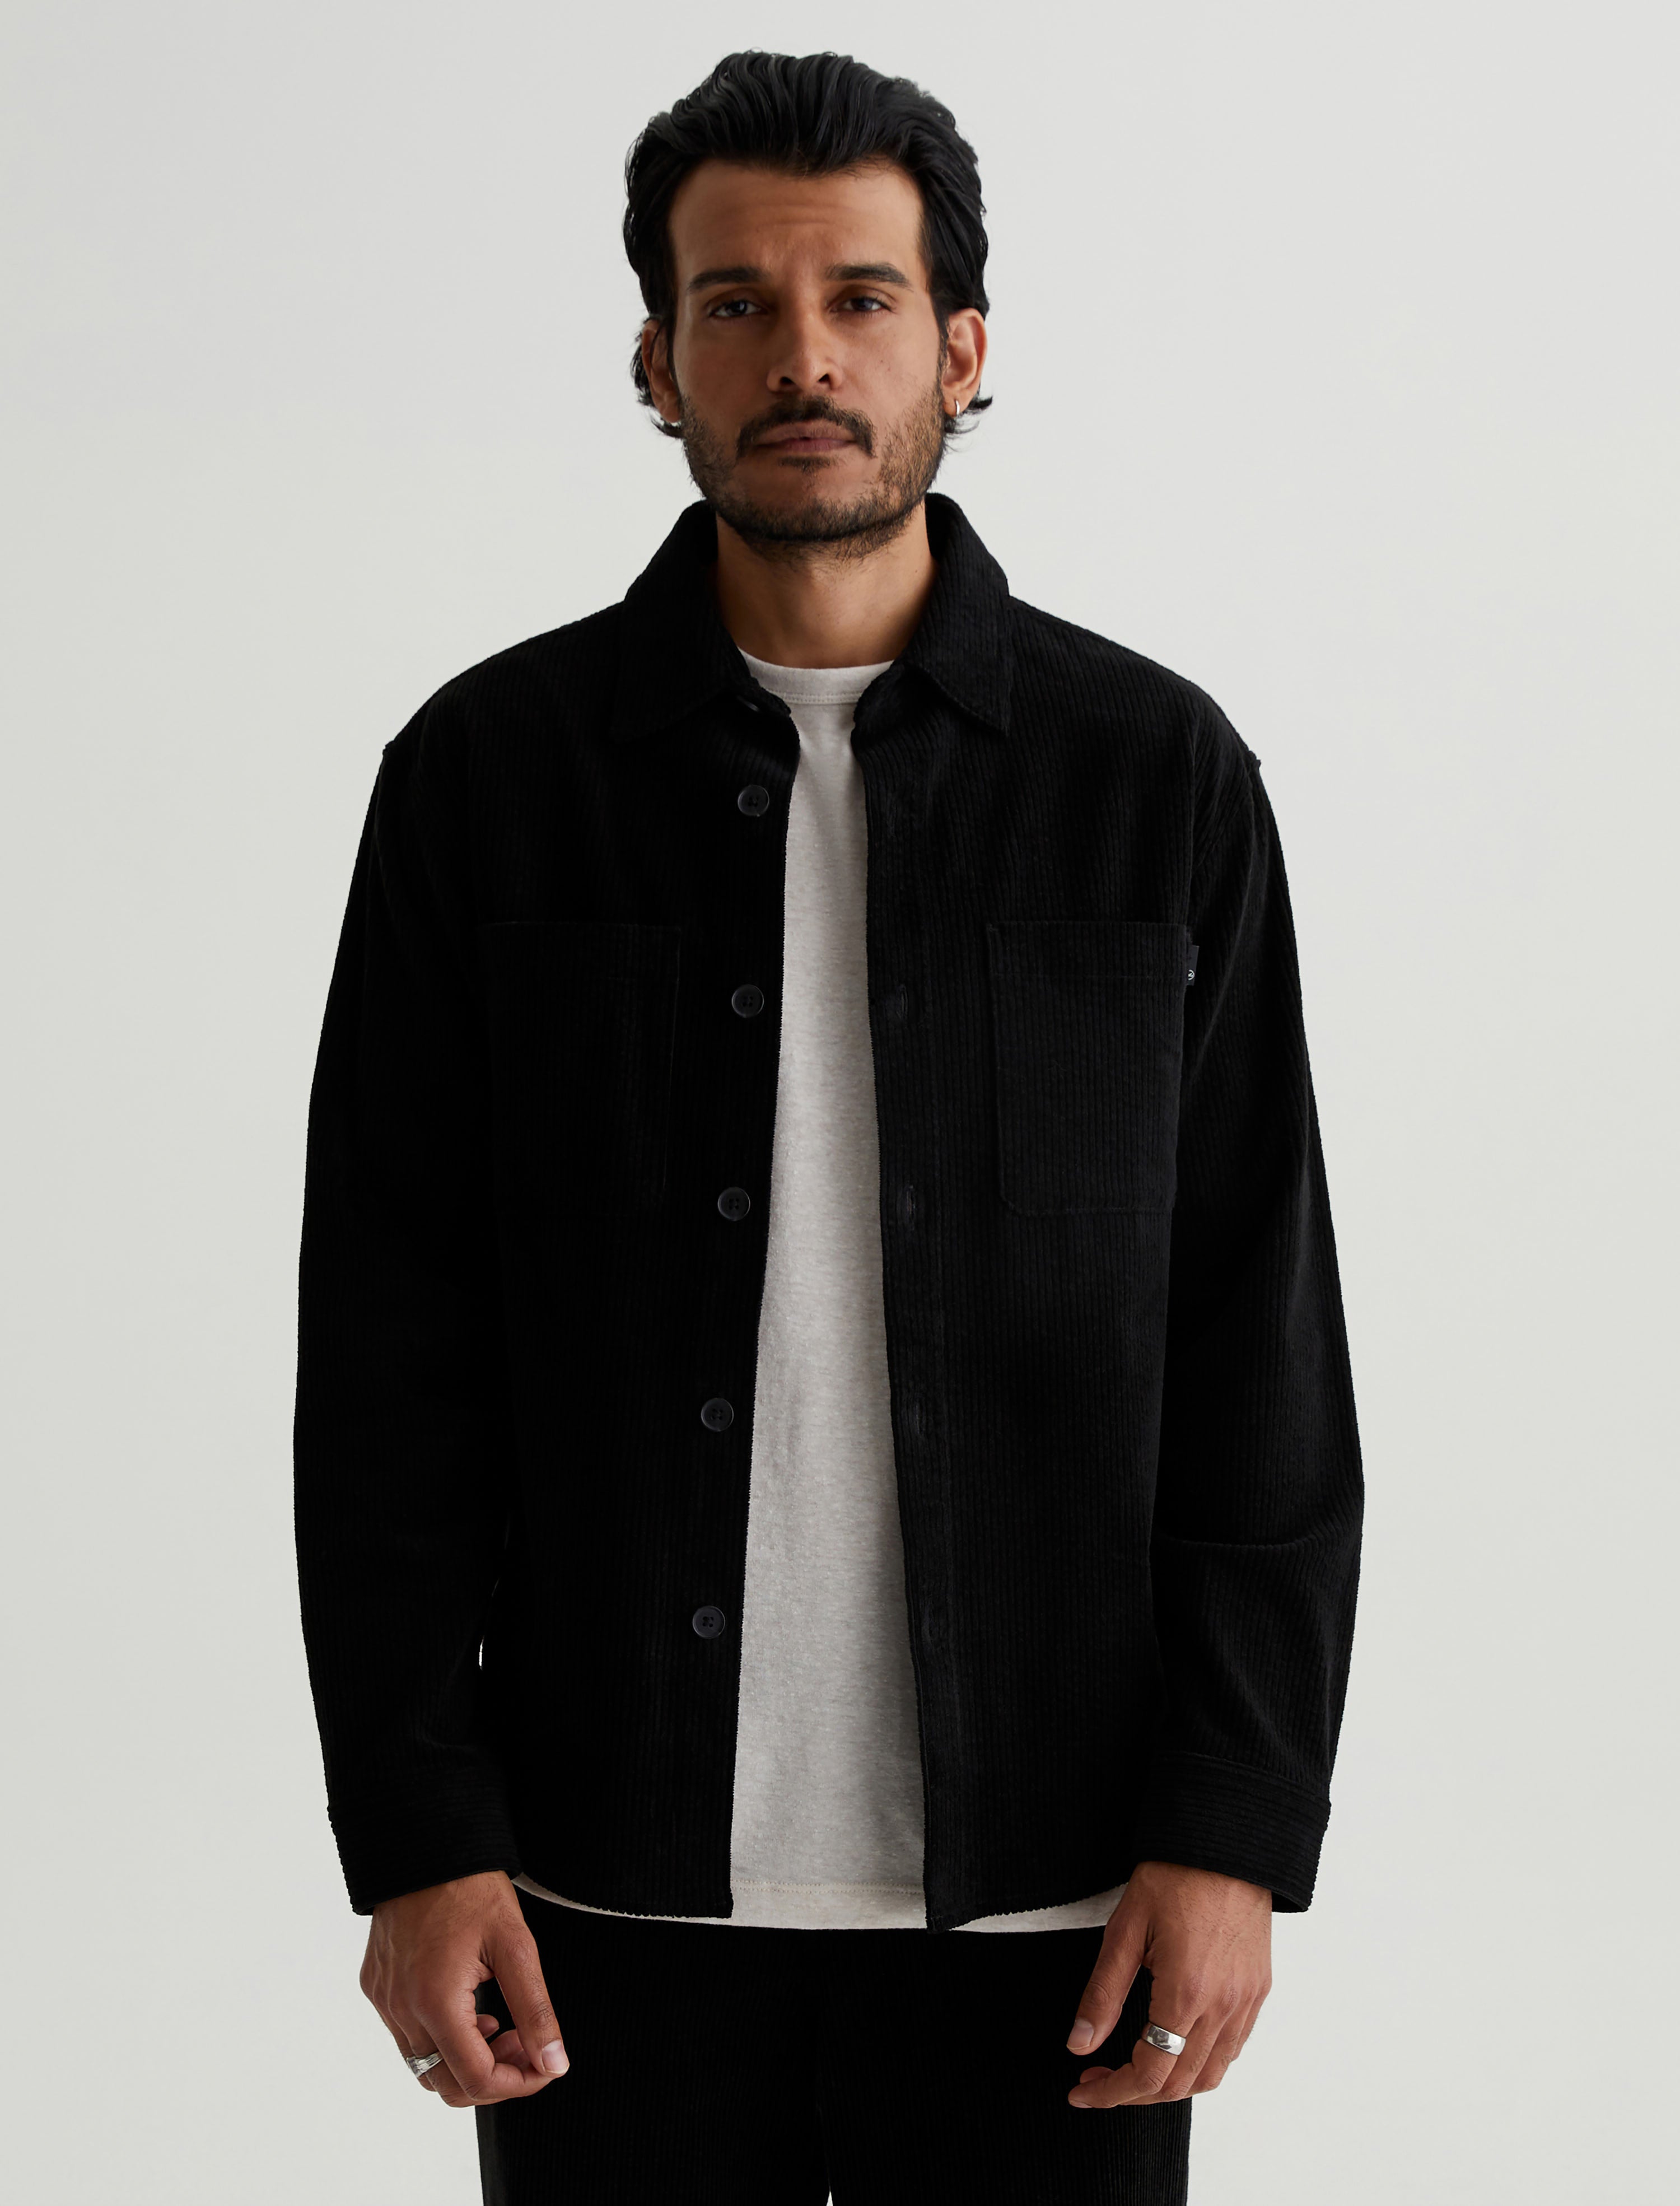 Black Casual Jacket for Men 'The Lord of the Skies' - ID: 43083